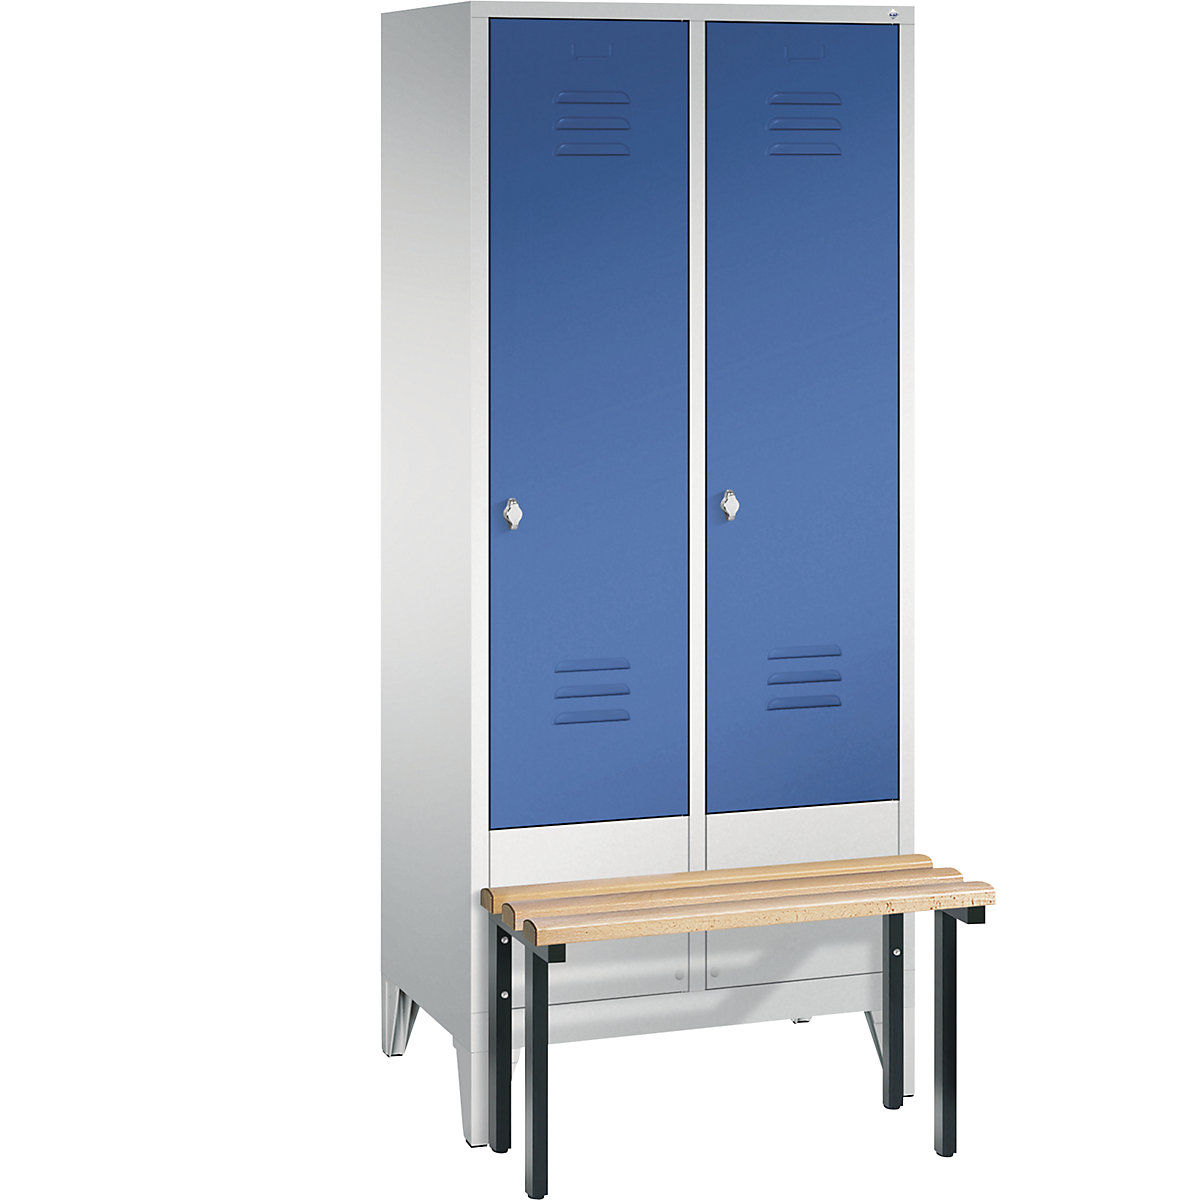 CLASSIC cloakroom locker with bench mounted in front – C+P, 2 compartments, compartment width 400 mm, light grey / gentian blue-5